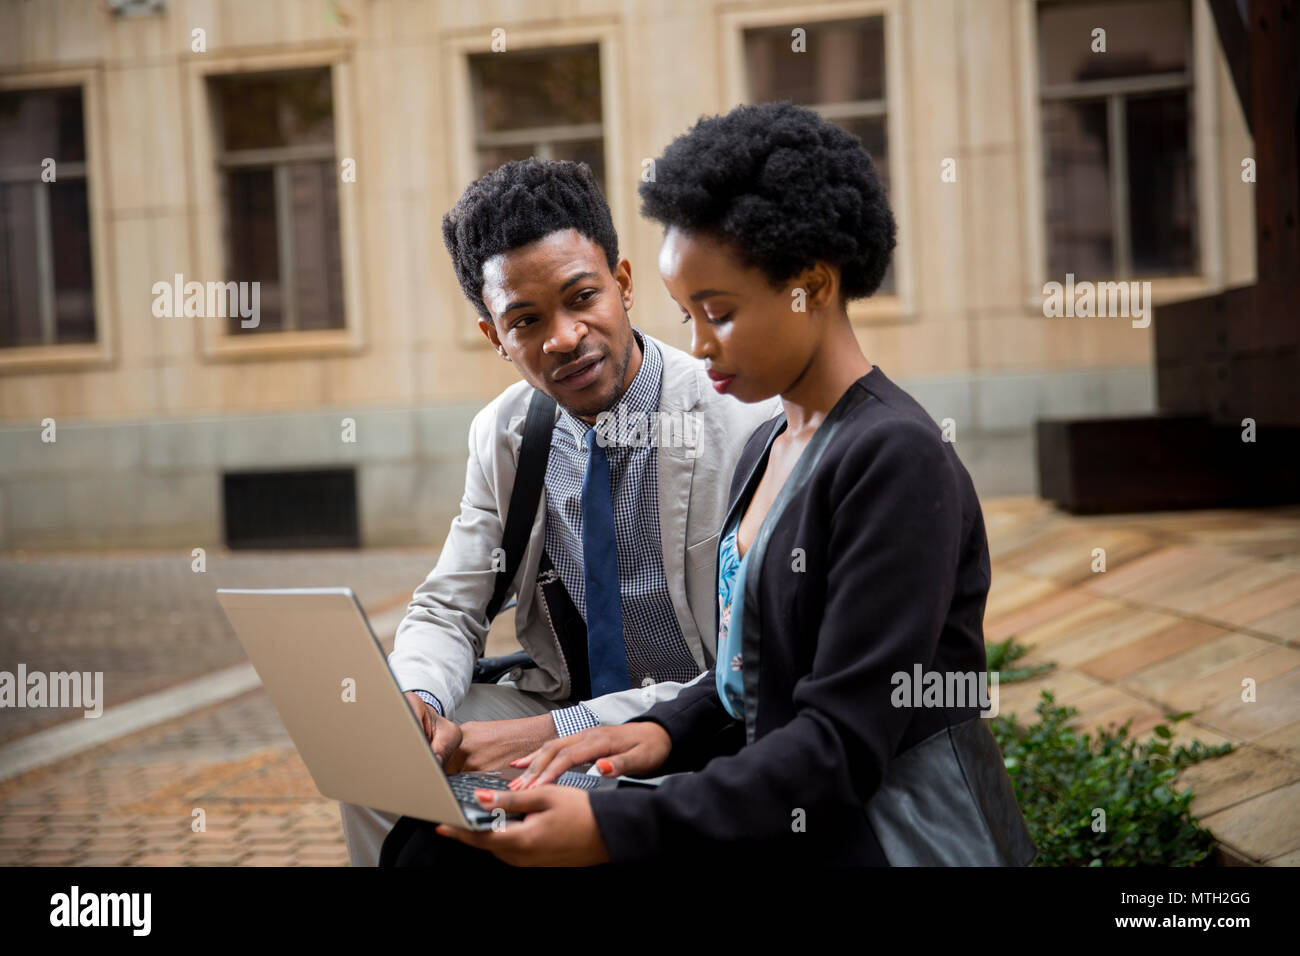 Business woman and man working on laptop Stock Photo